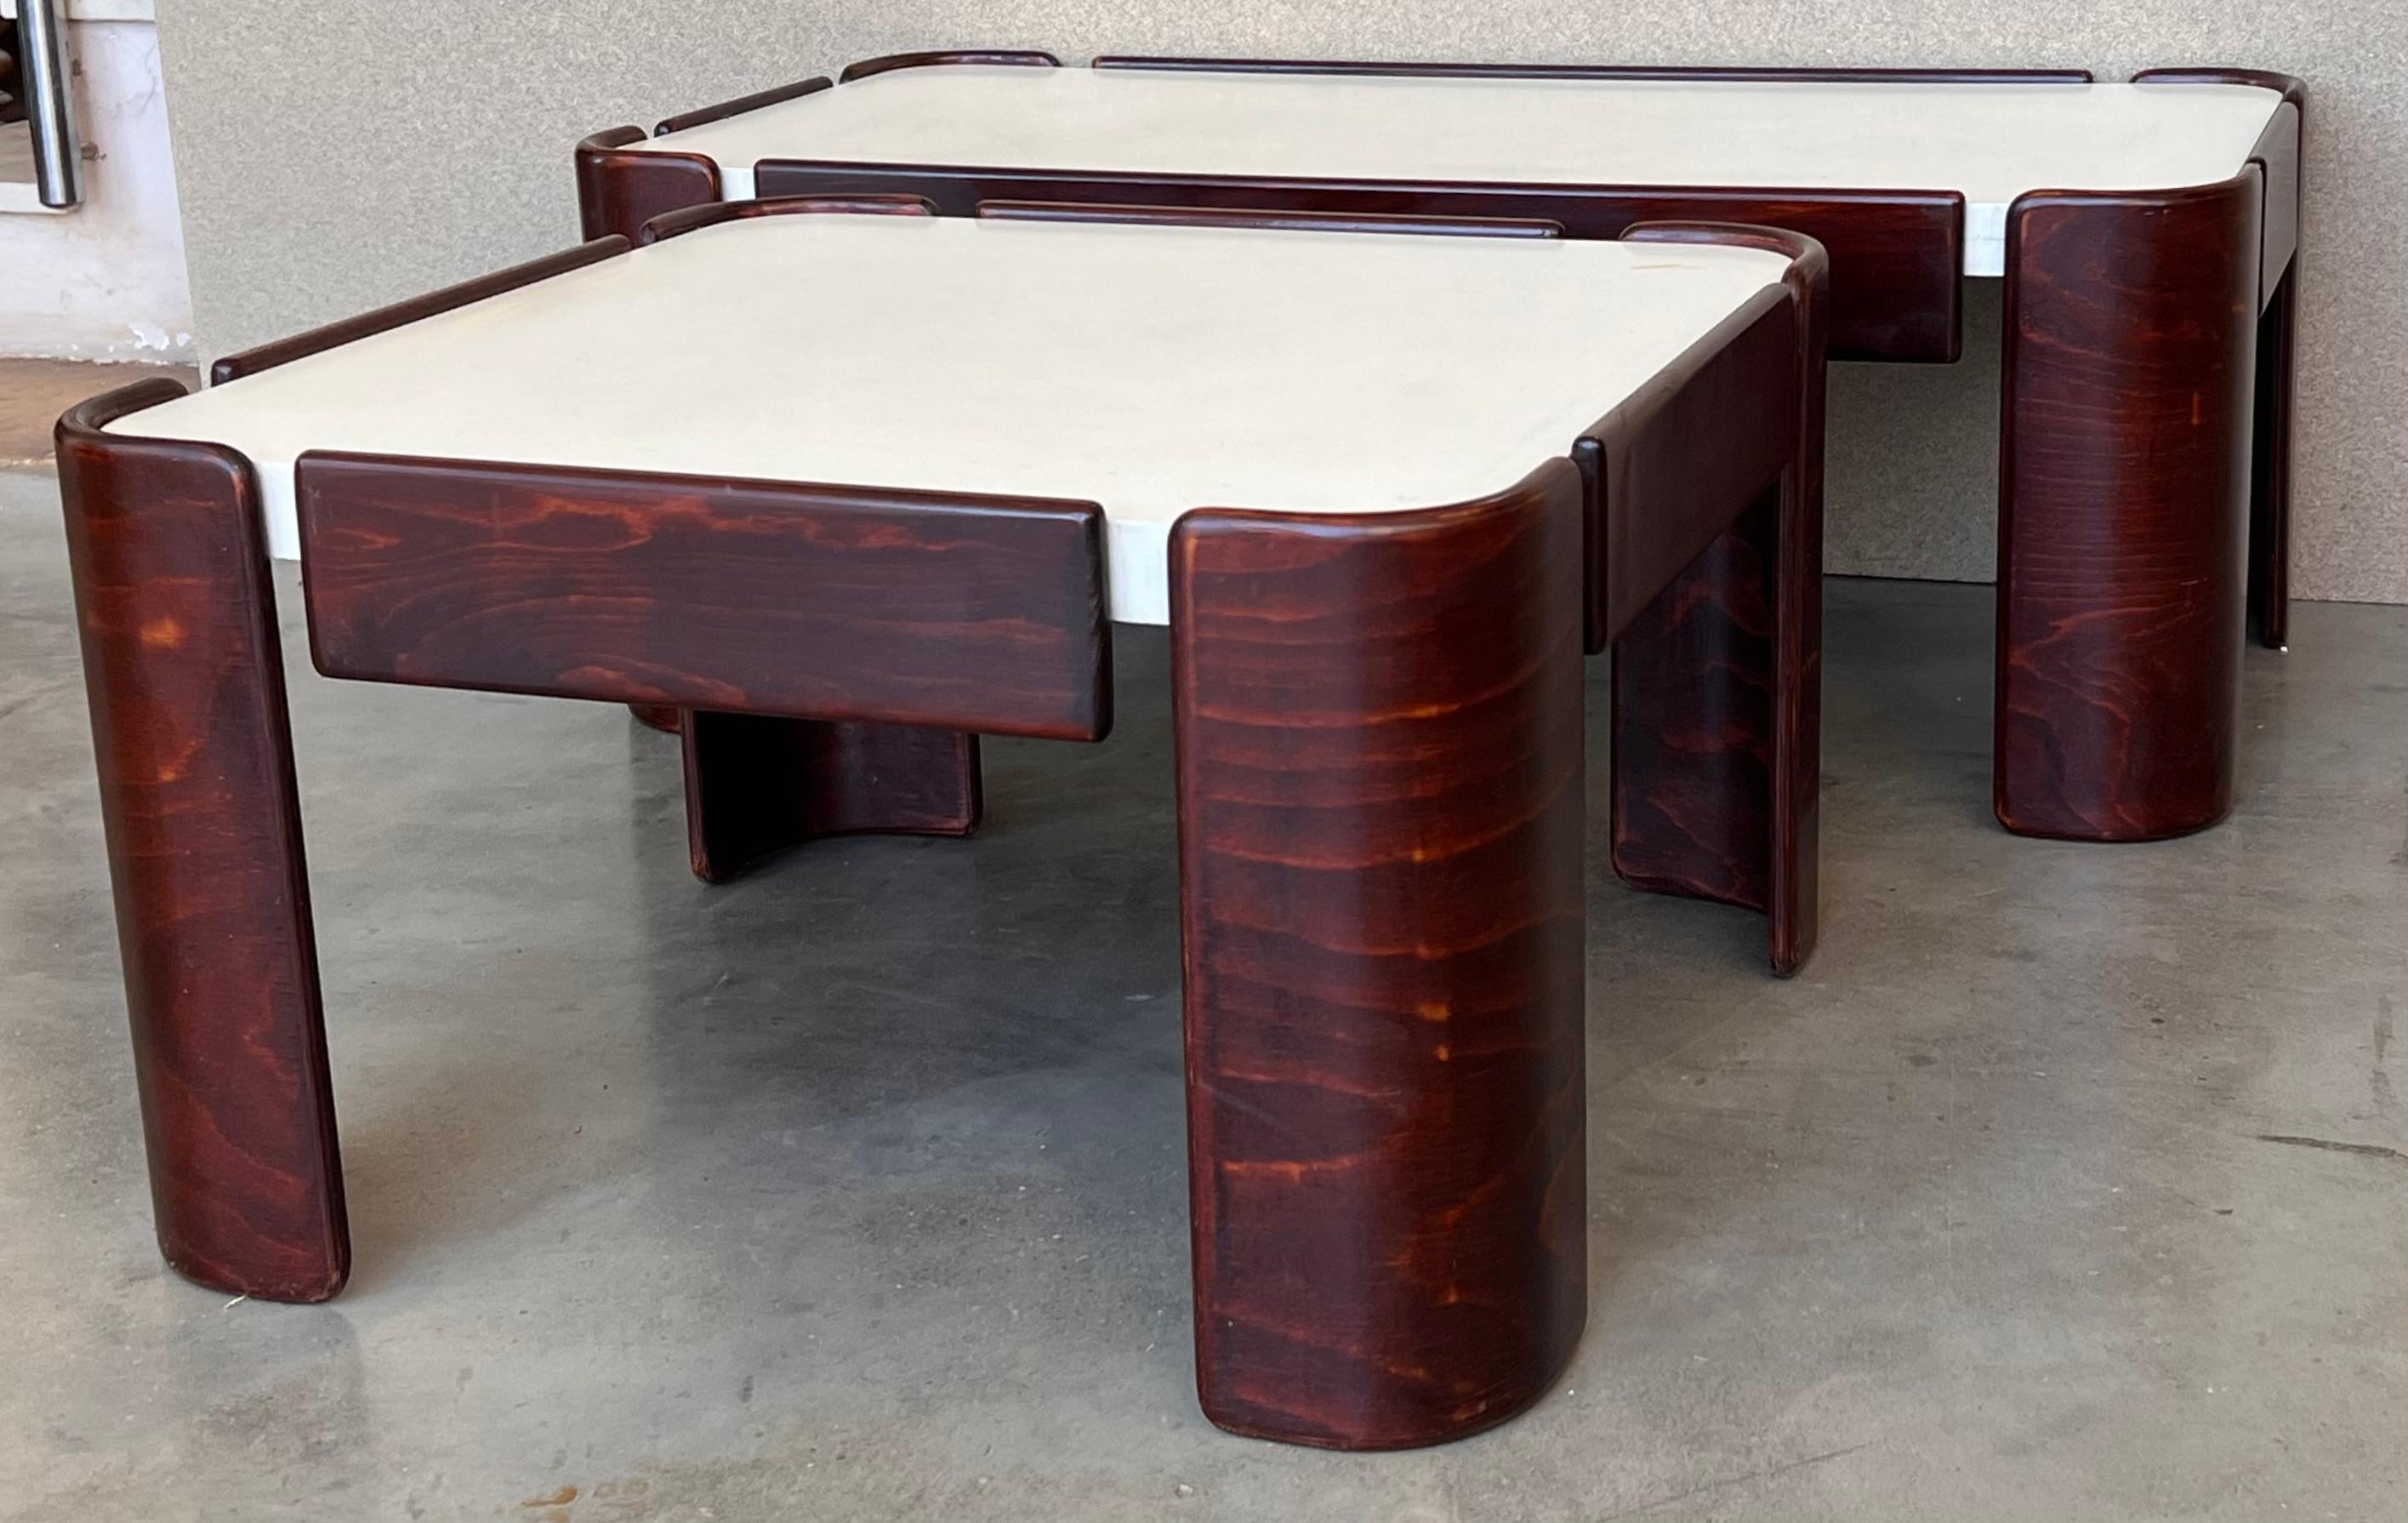 Set of Mid-Century Modern Coffee Tables with Curved Legs and White Top In Good Condition For Sale In Miami, FL